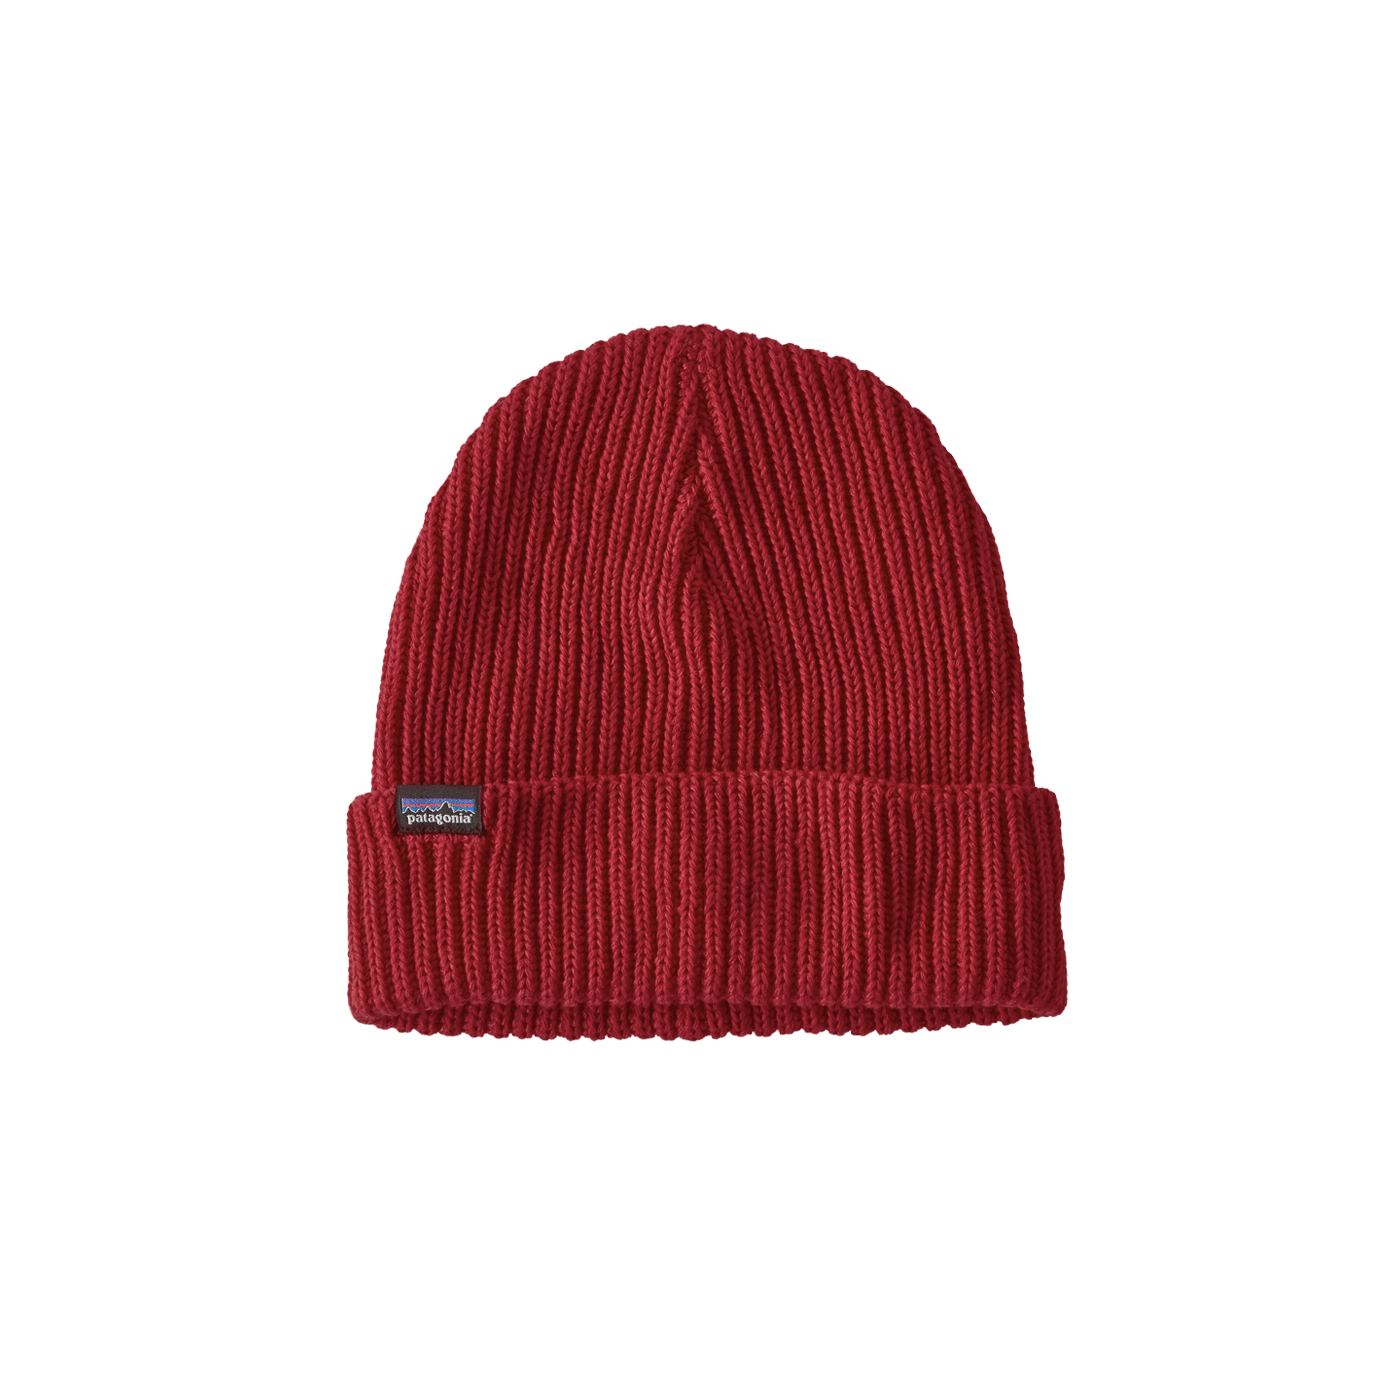 Patagonia Fishermans Rolled Beanie Hot Ember